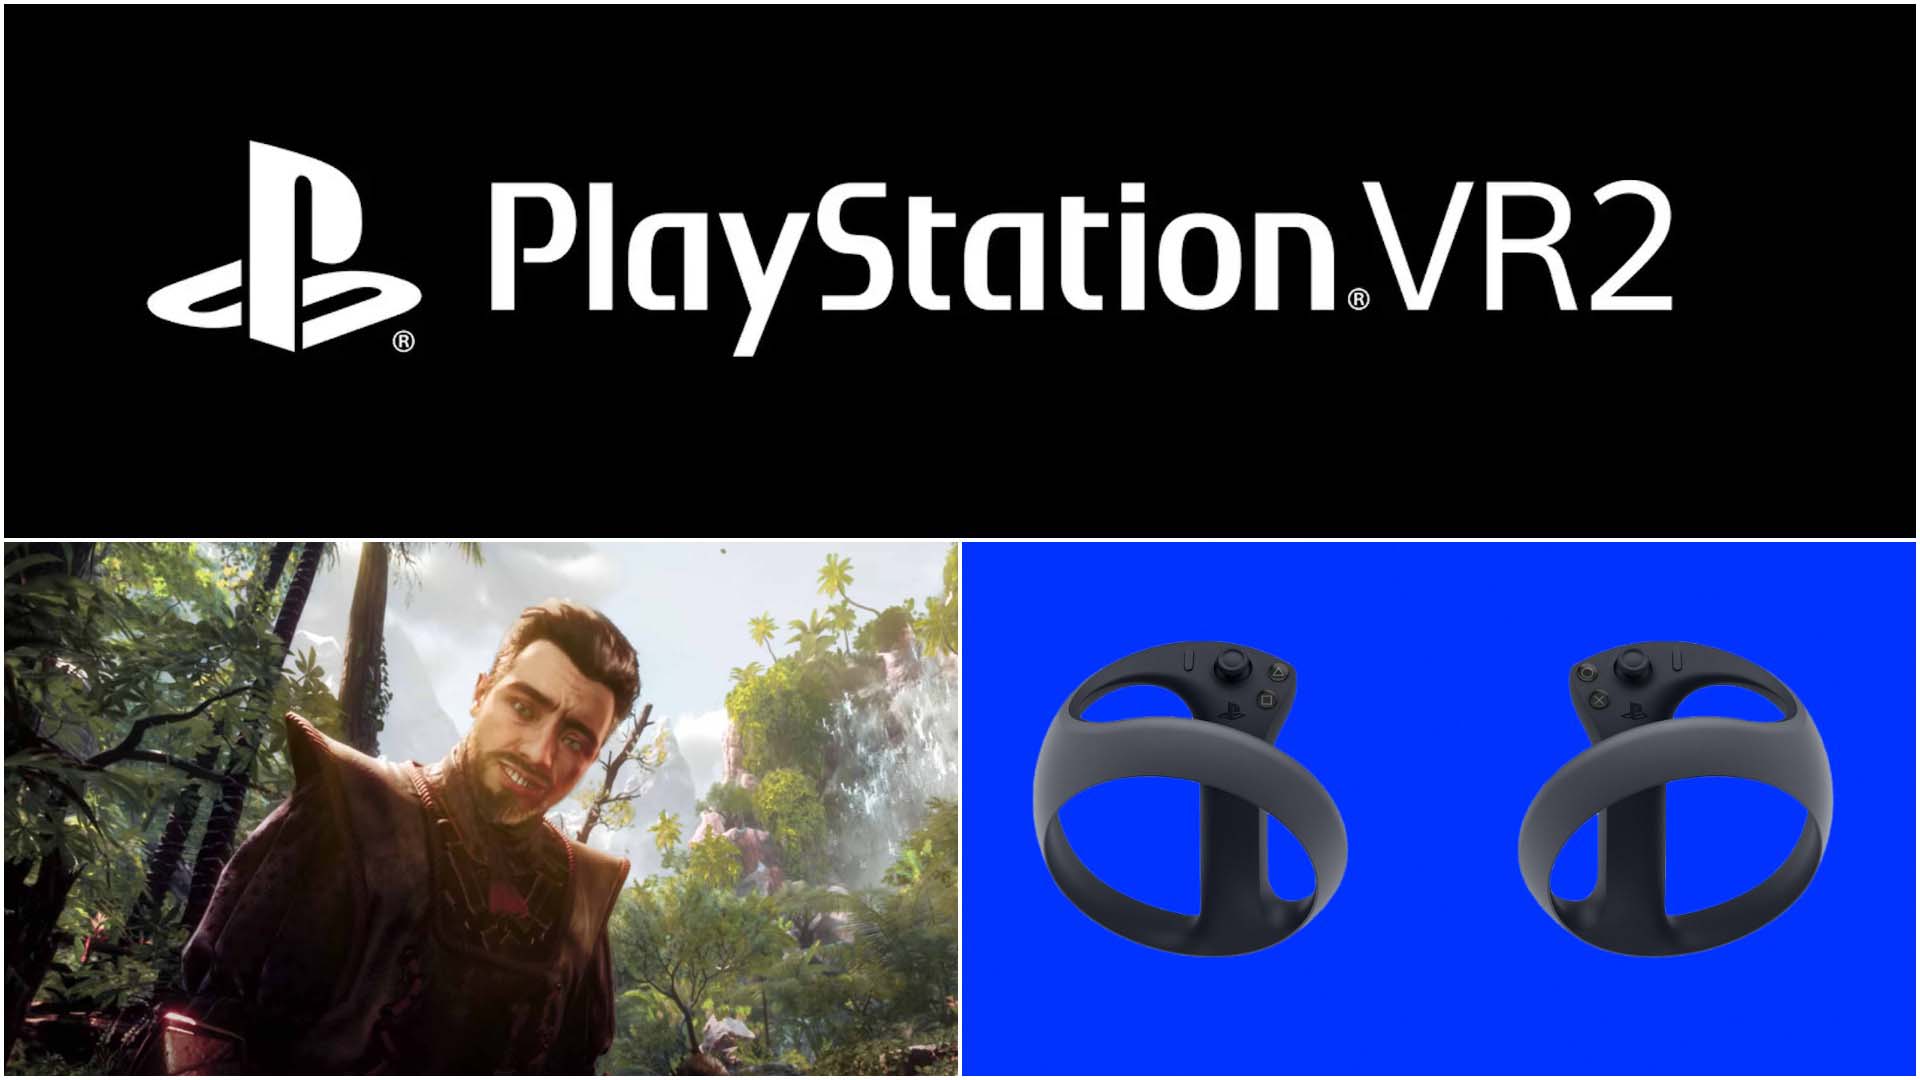 Does PSVR 2 need a camera to work on PS5?